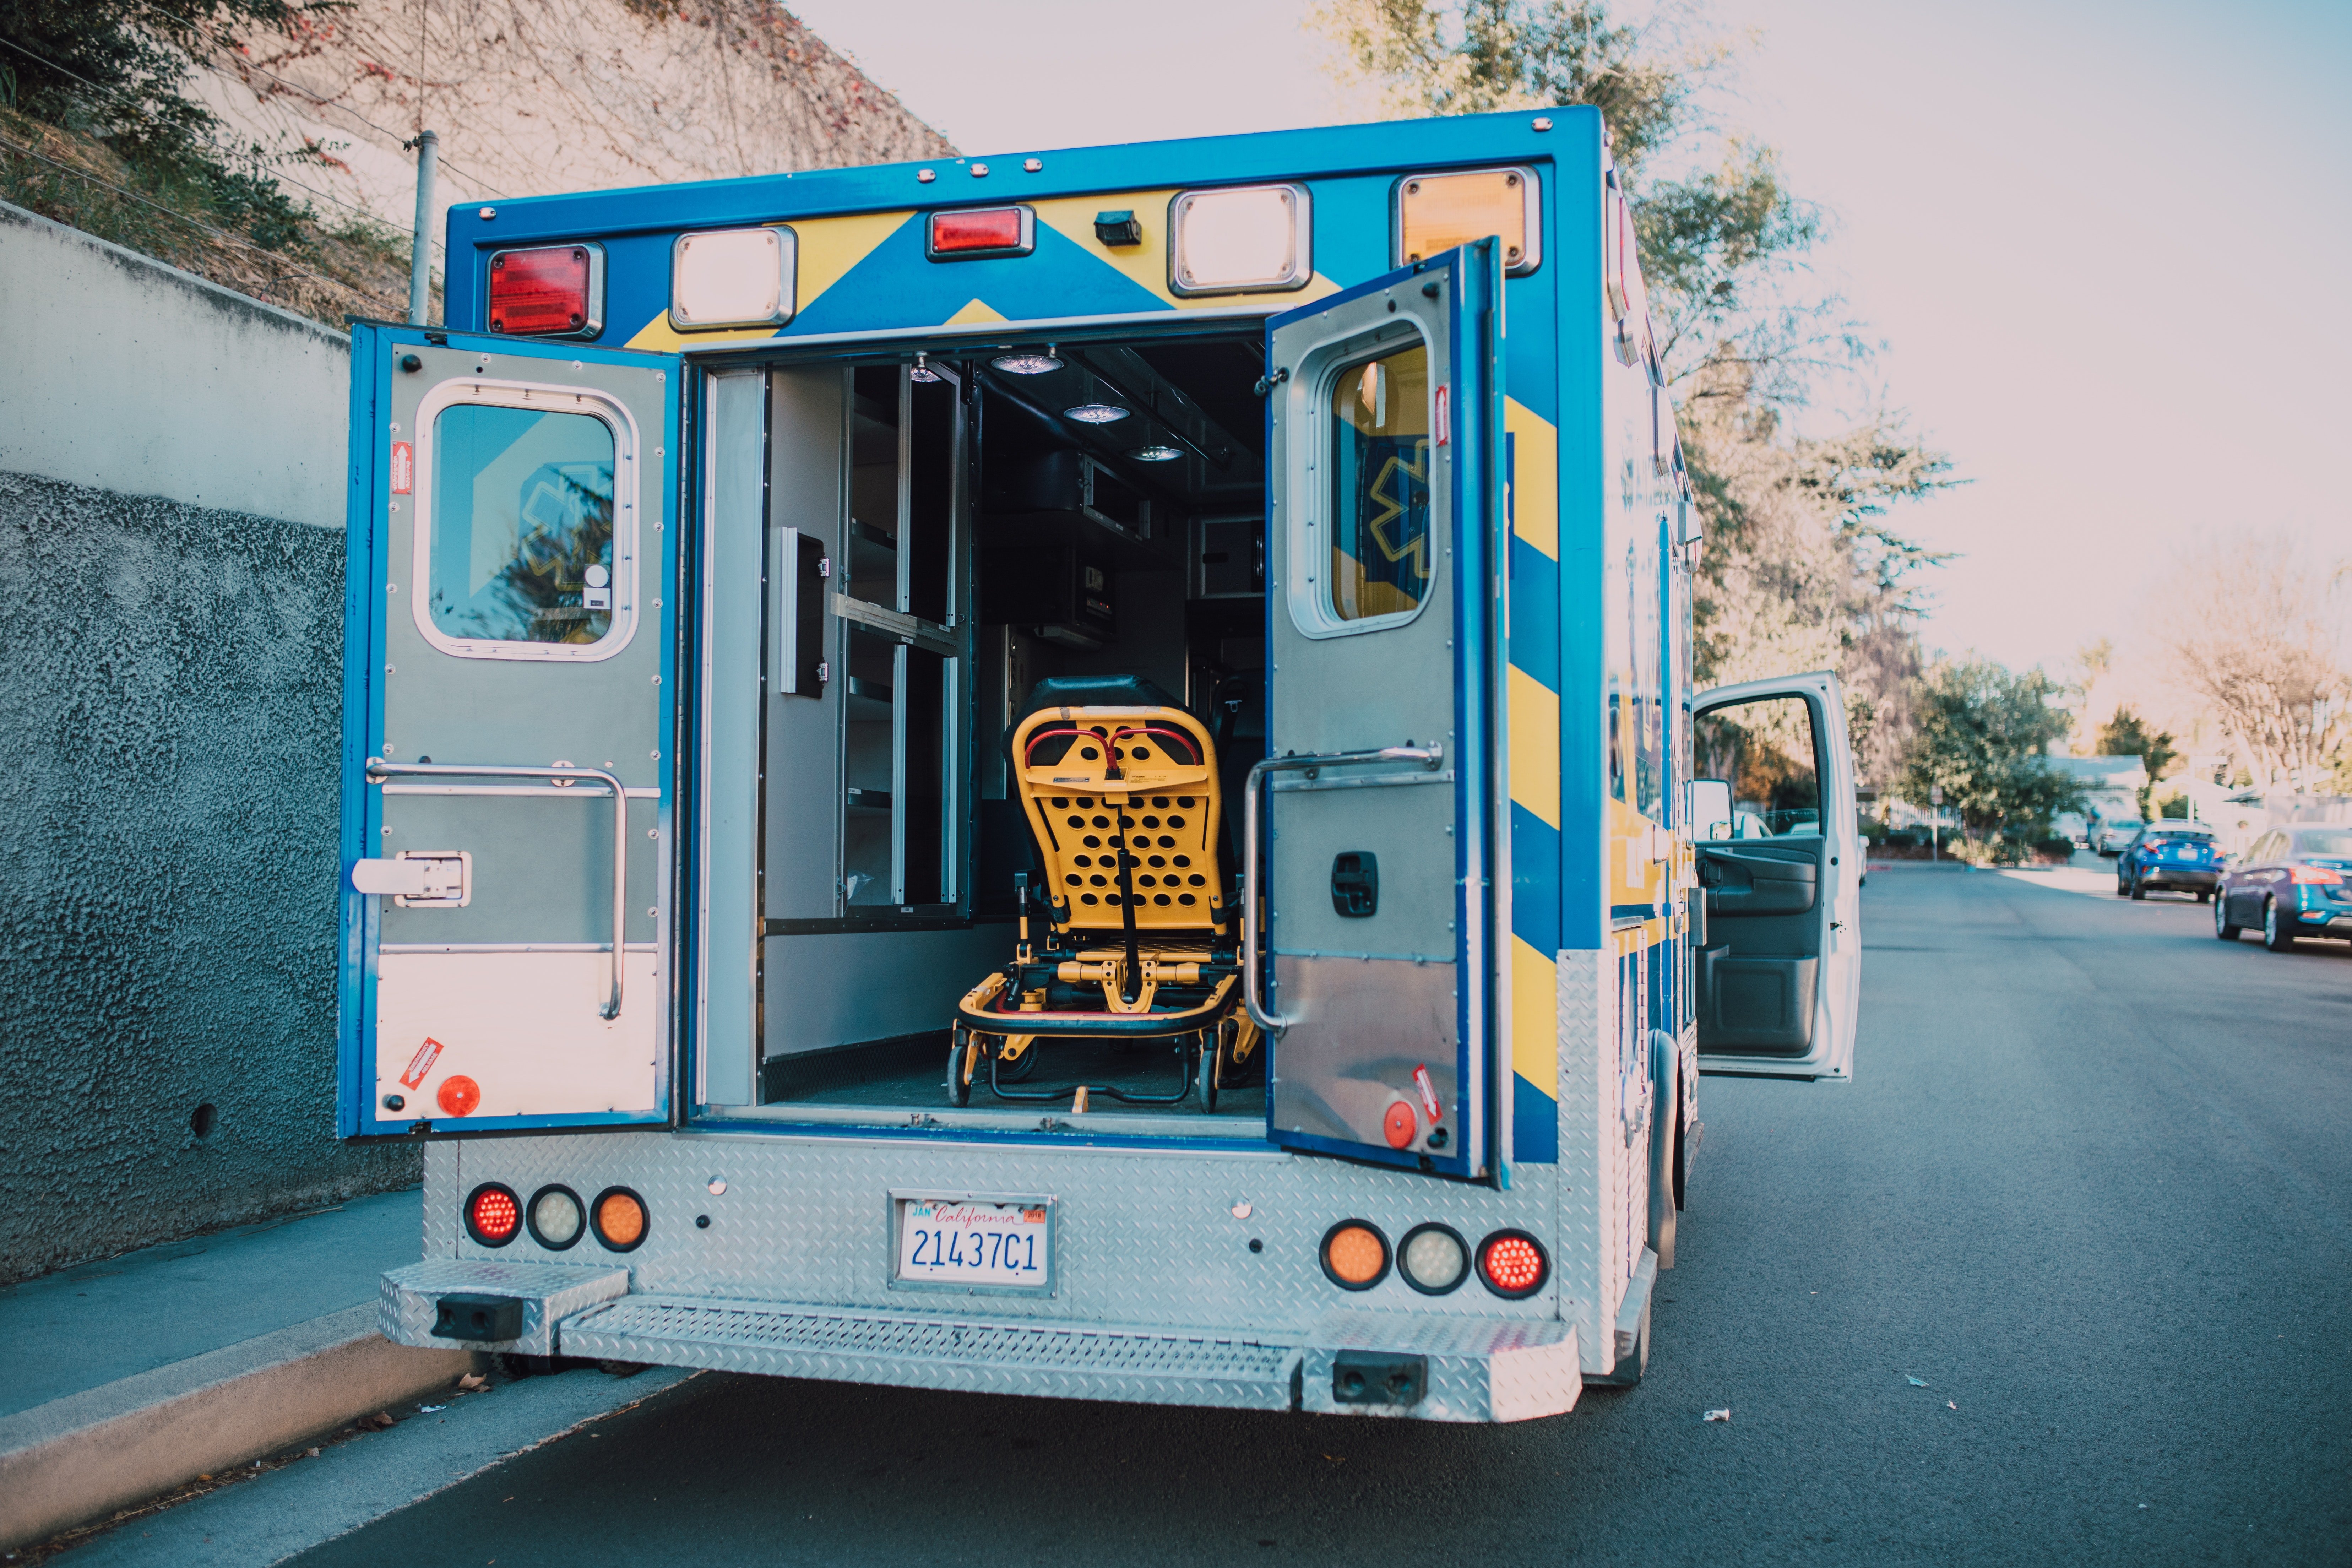 An ambulance with its back doors open. | Photo: Pexels